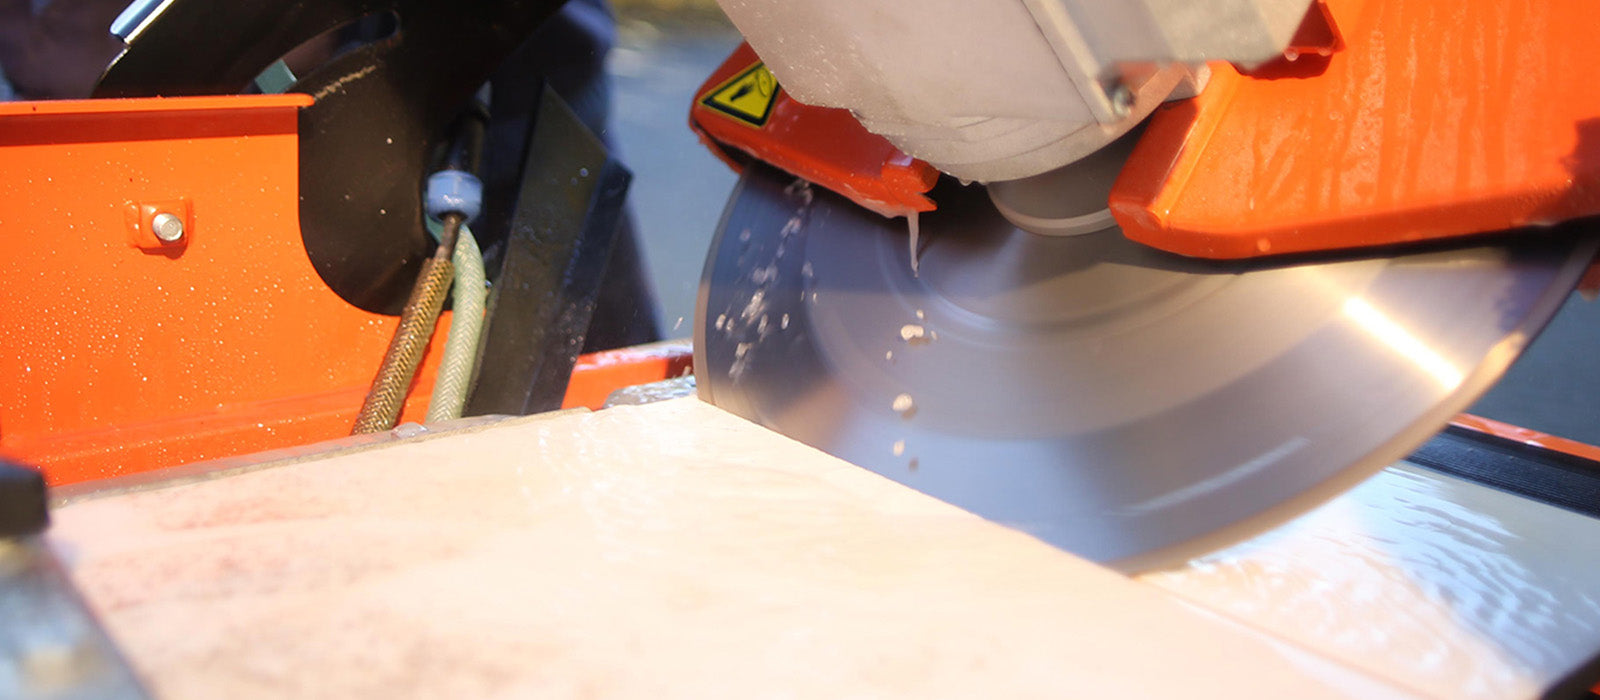 15 Essential Table Saw Safety Tips